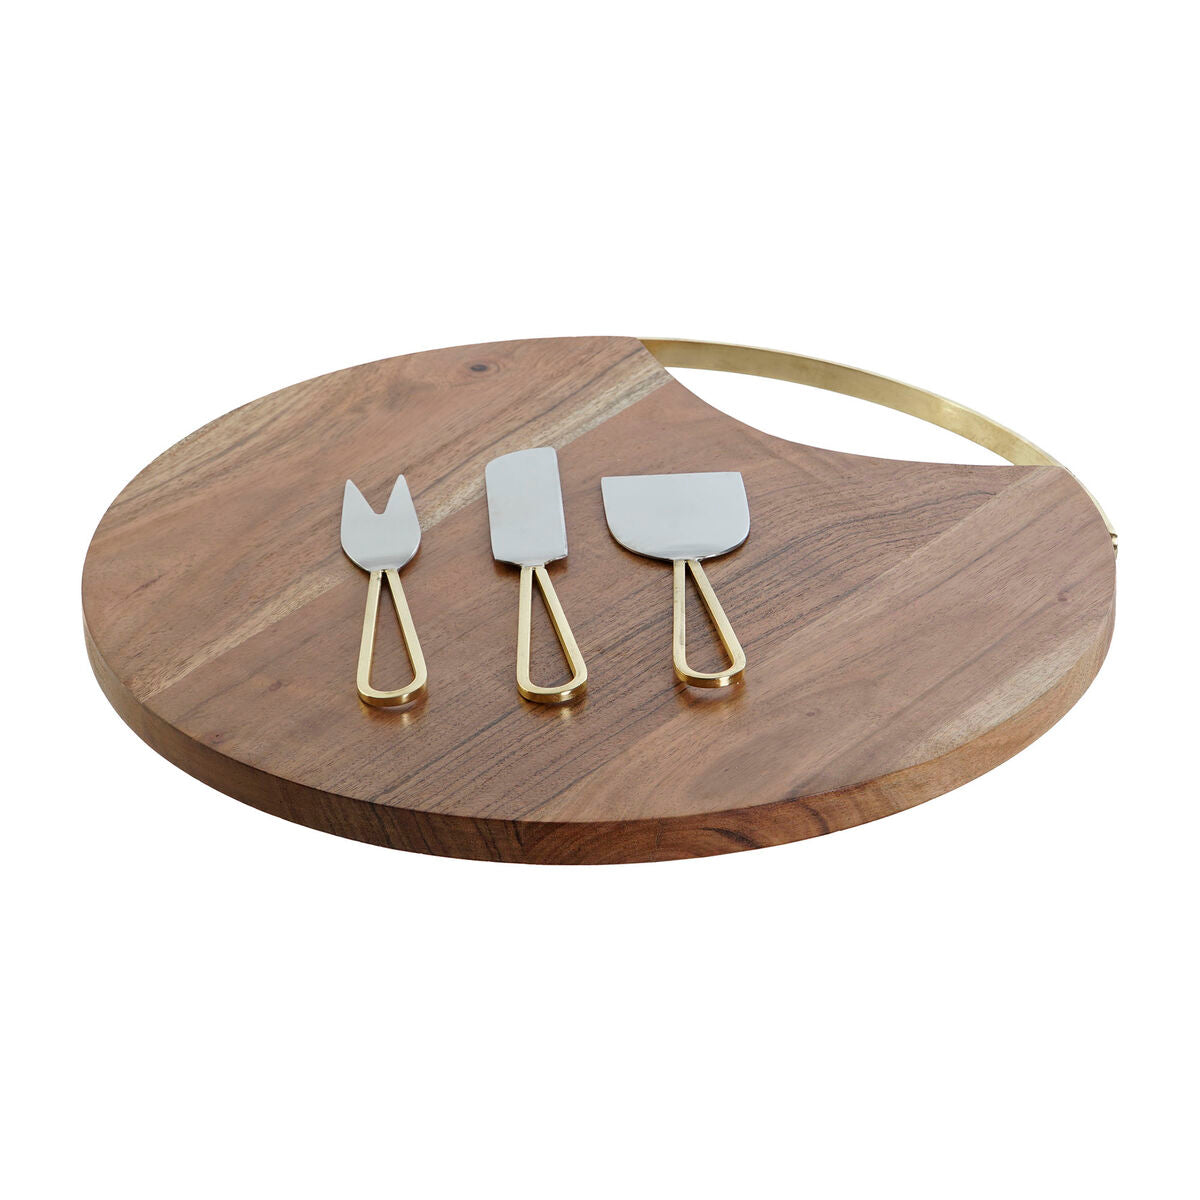 Cutting board DKD Home Decor Golden Natural Stainless steel Acacia 35,5 x 35,5 x 1,5 cm (4 Pieces)